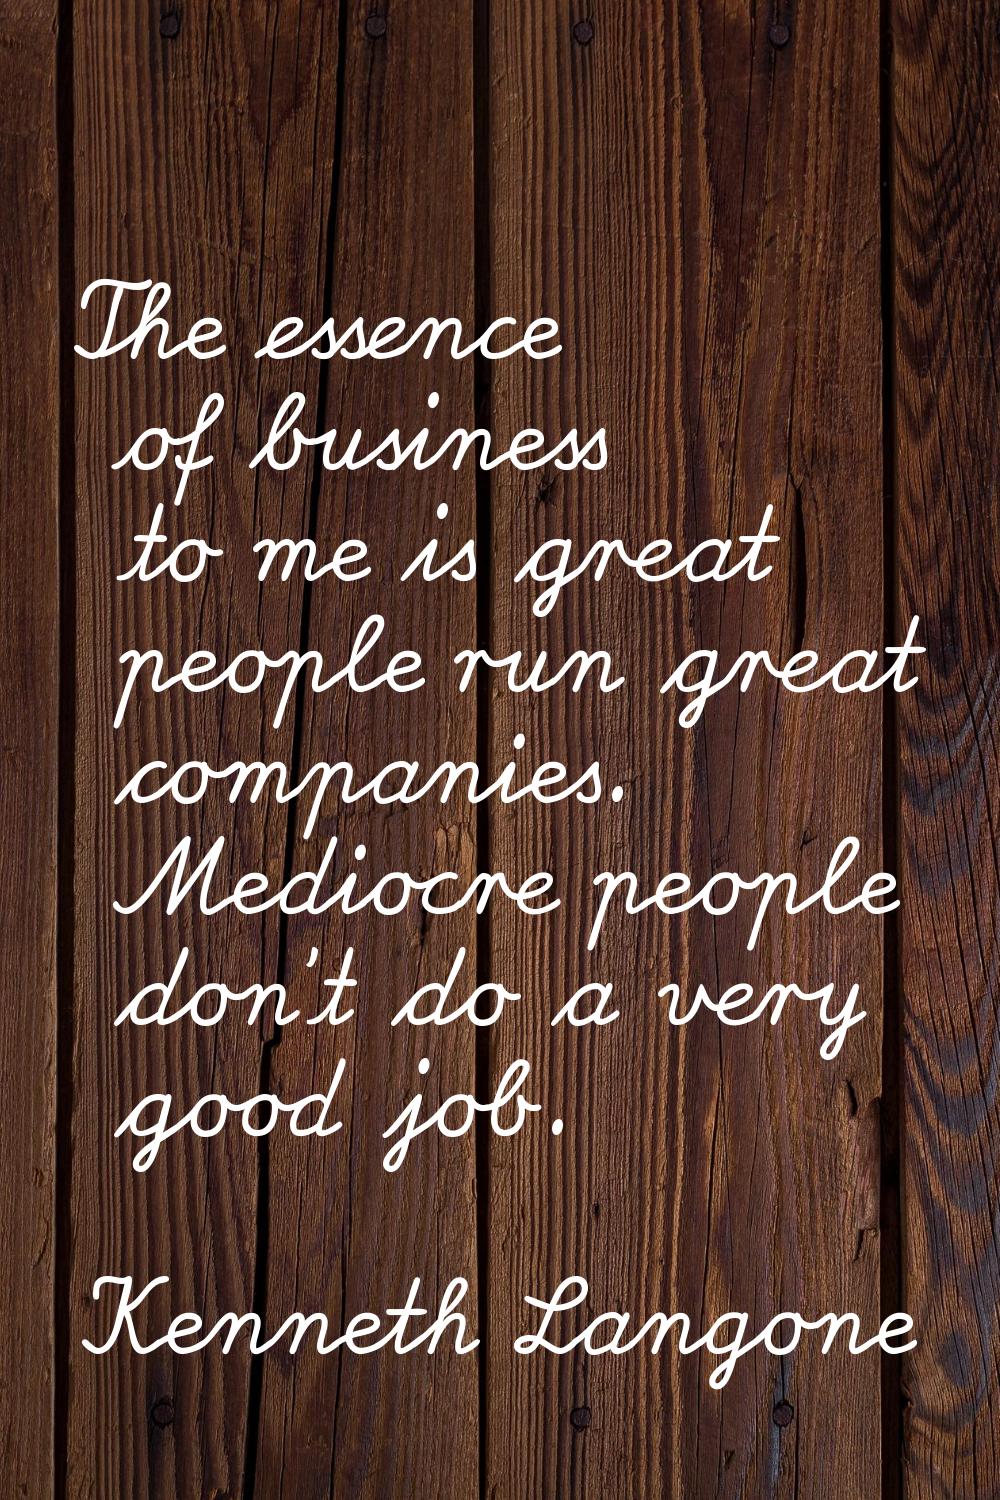 The essence of business to me is great people run great companies. Mediocre people don't do a very 